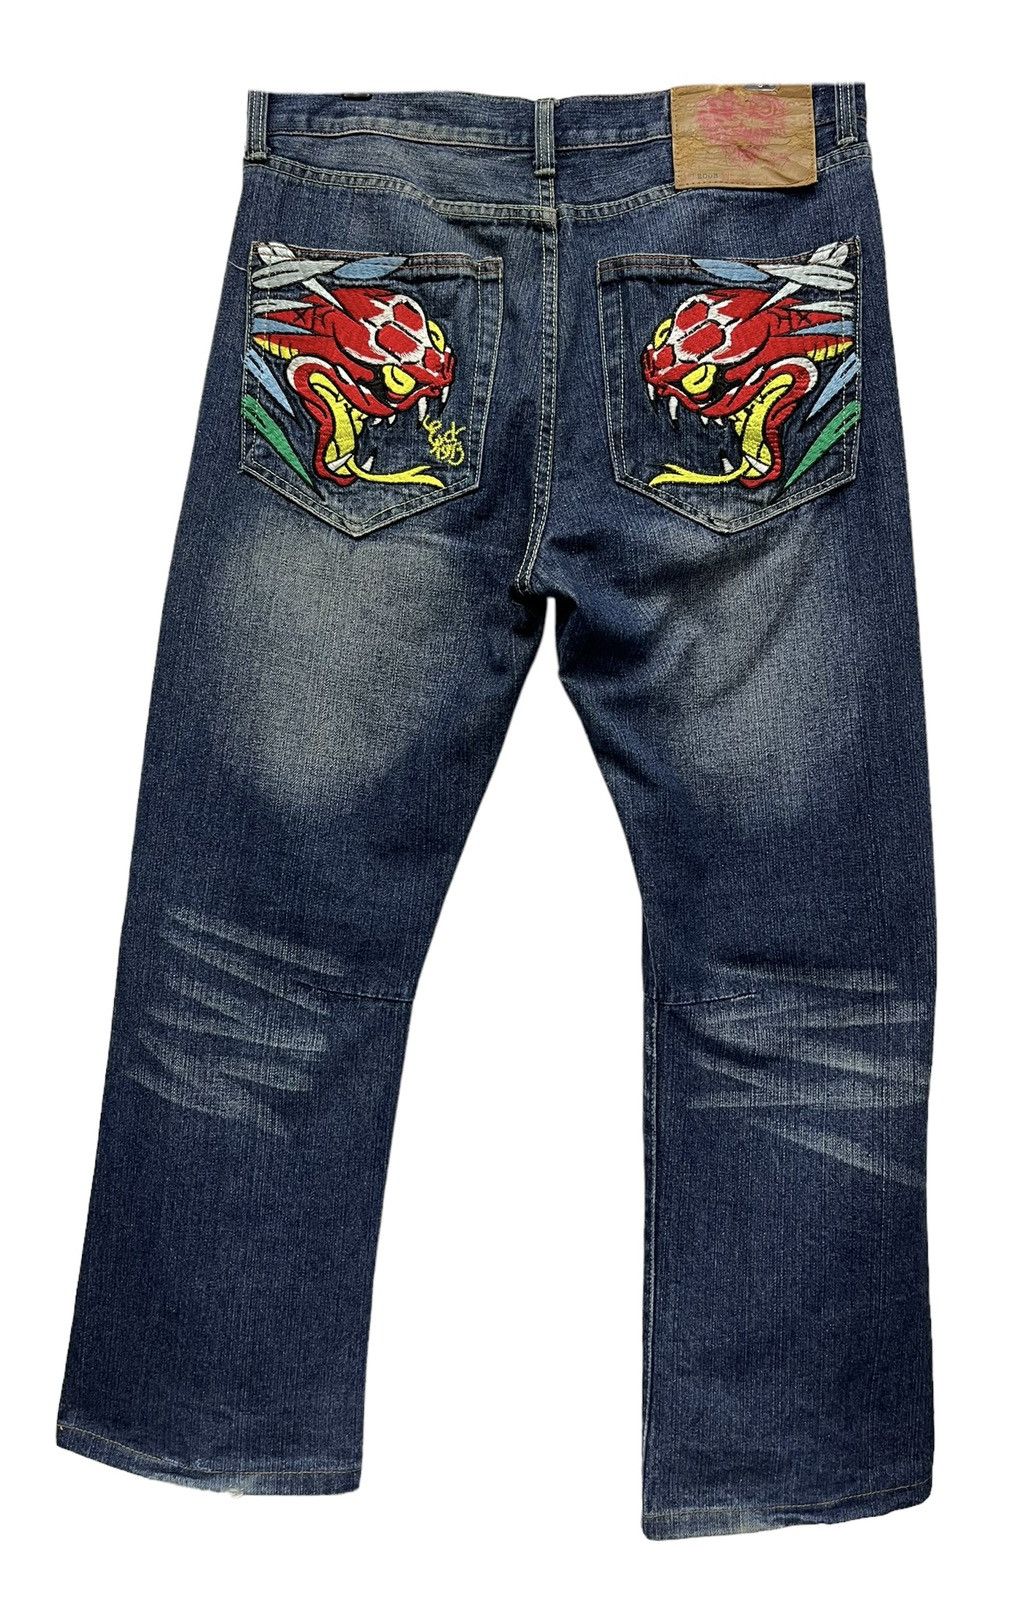 Ed Hardy BINDING NOW🔥ED HARDY Snake & Dragon Embroidered Tattoo Wear Size US 33 - 8 Thumbnail